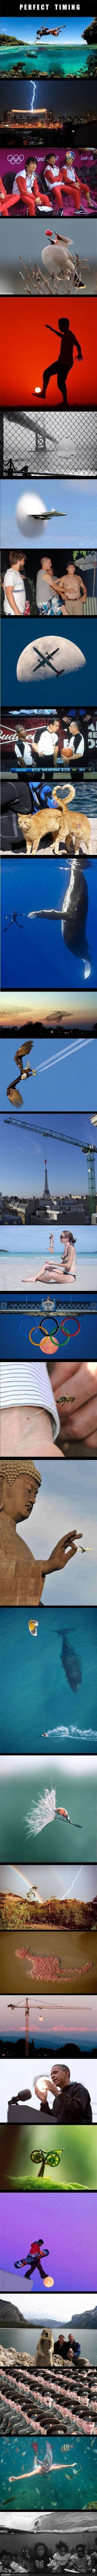 Perfectly Timed Photos